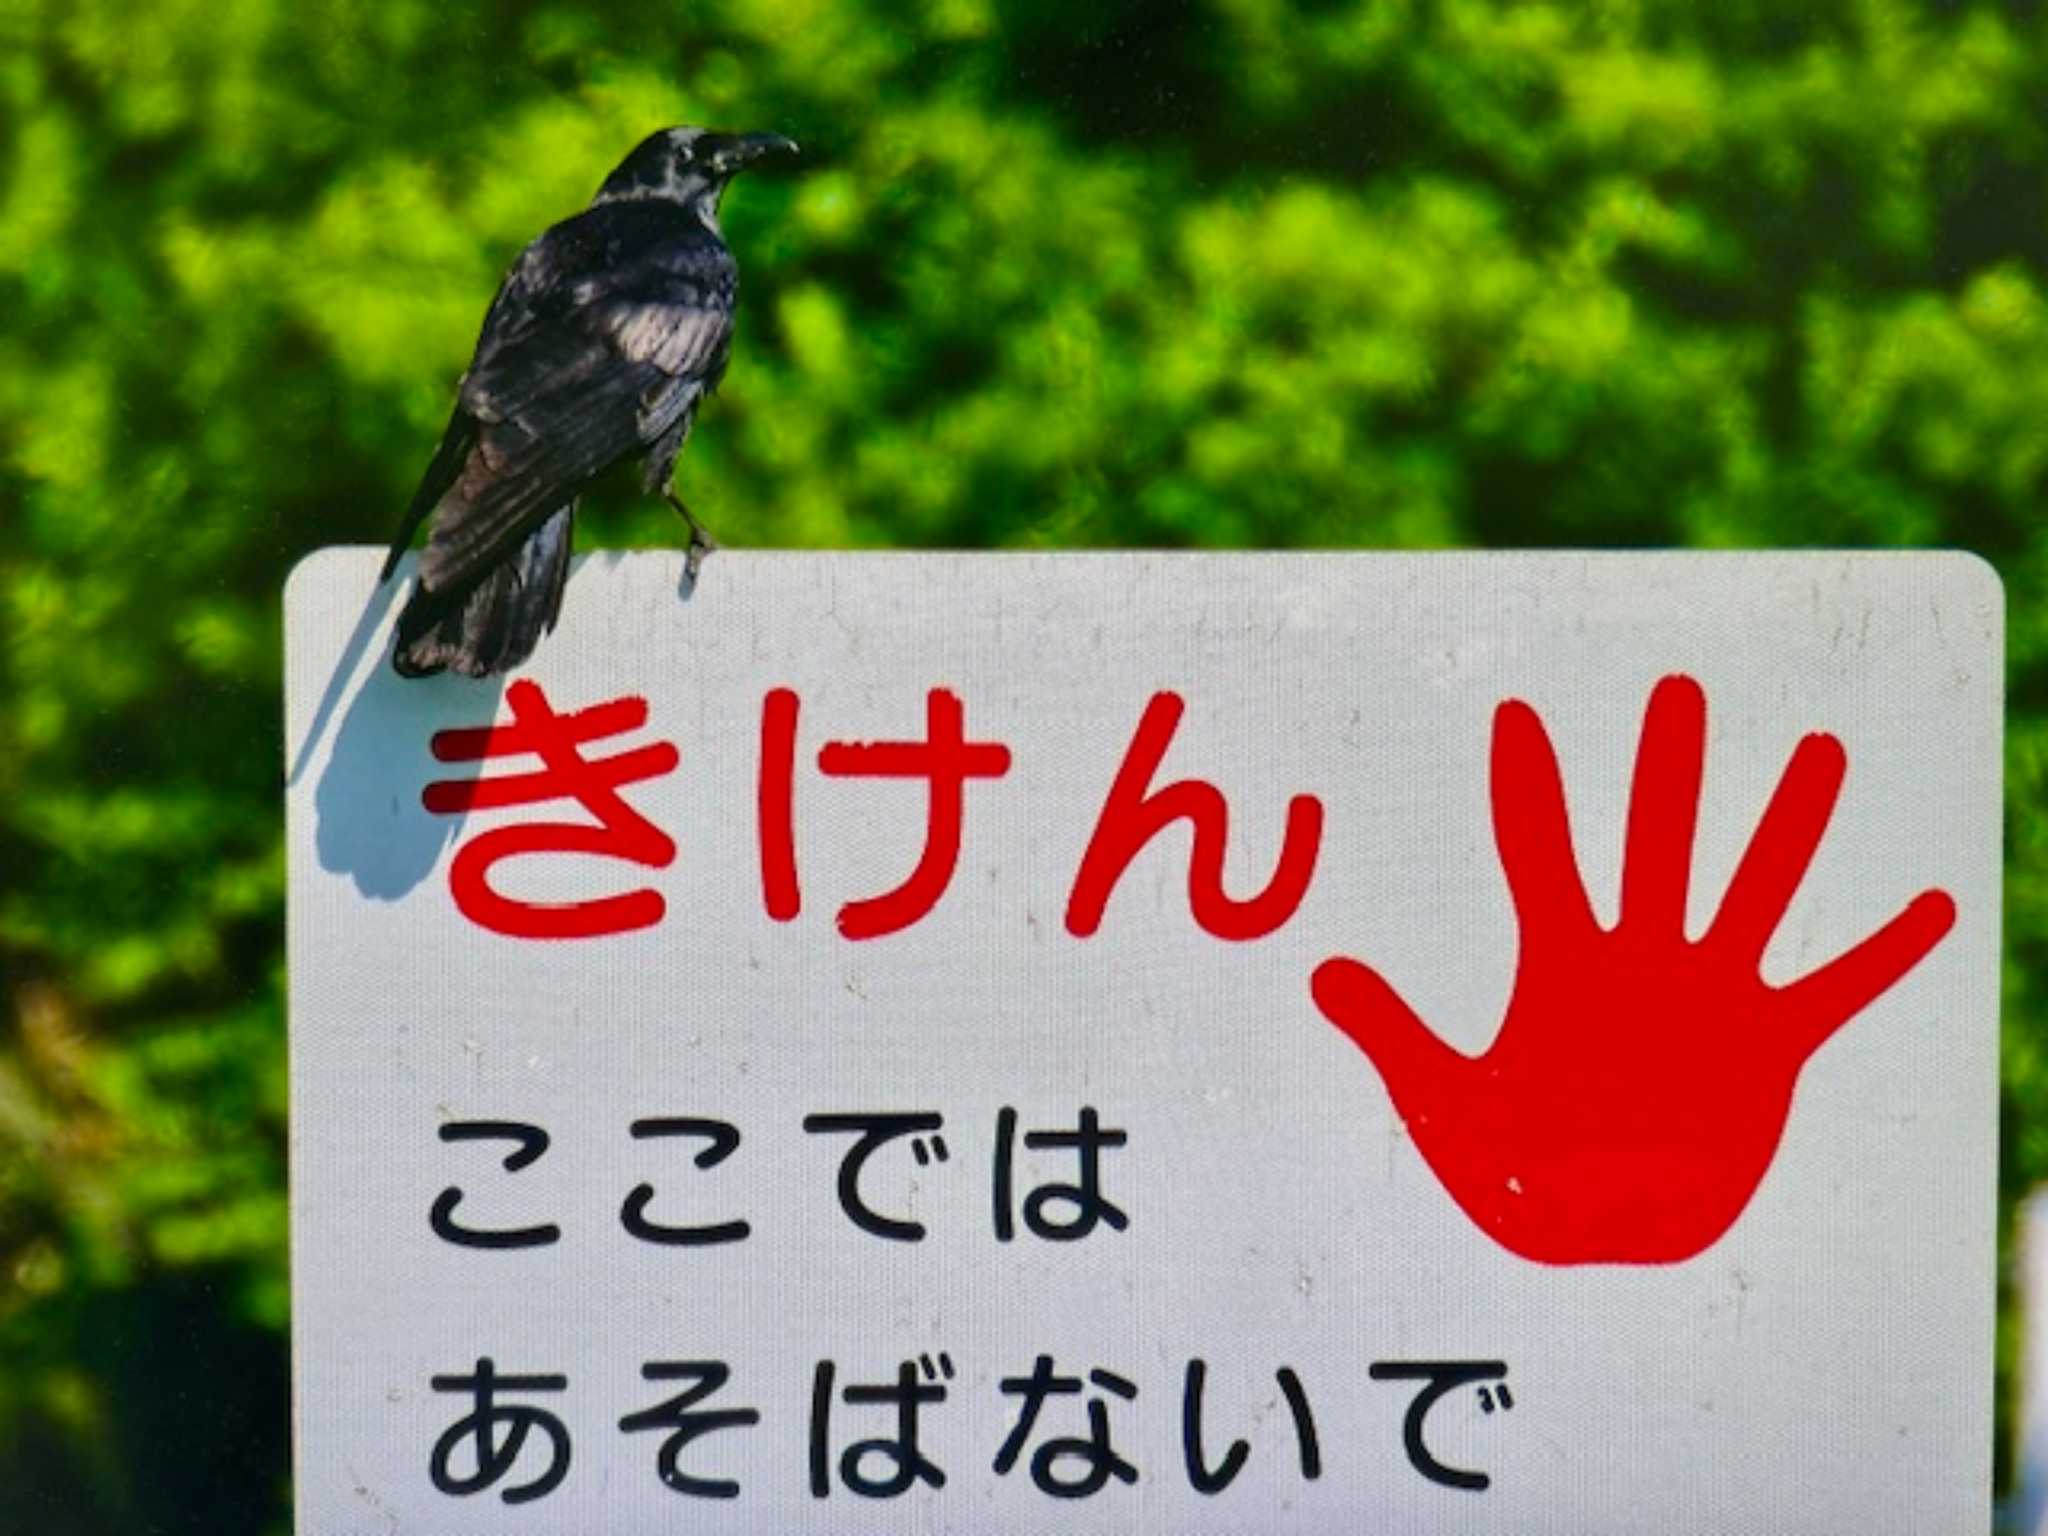 Photo of Carrion Crow at 上谷沼調整池 by ゆるゆるとりみんgoo